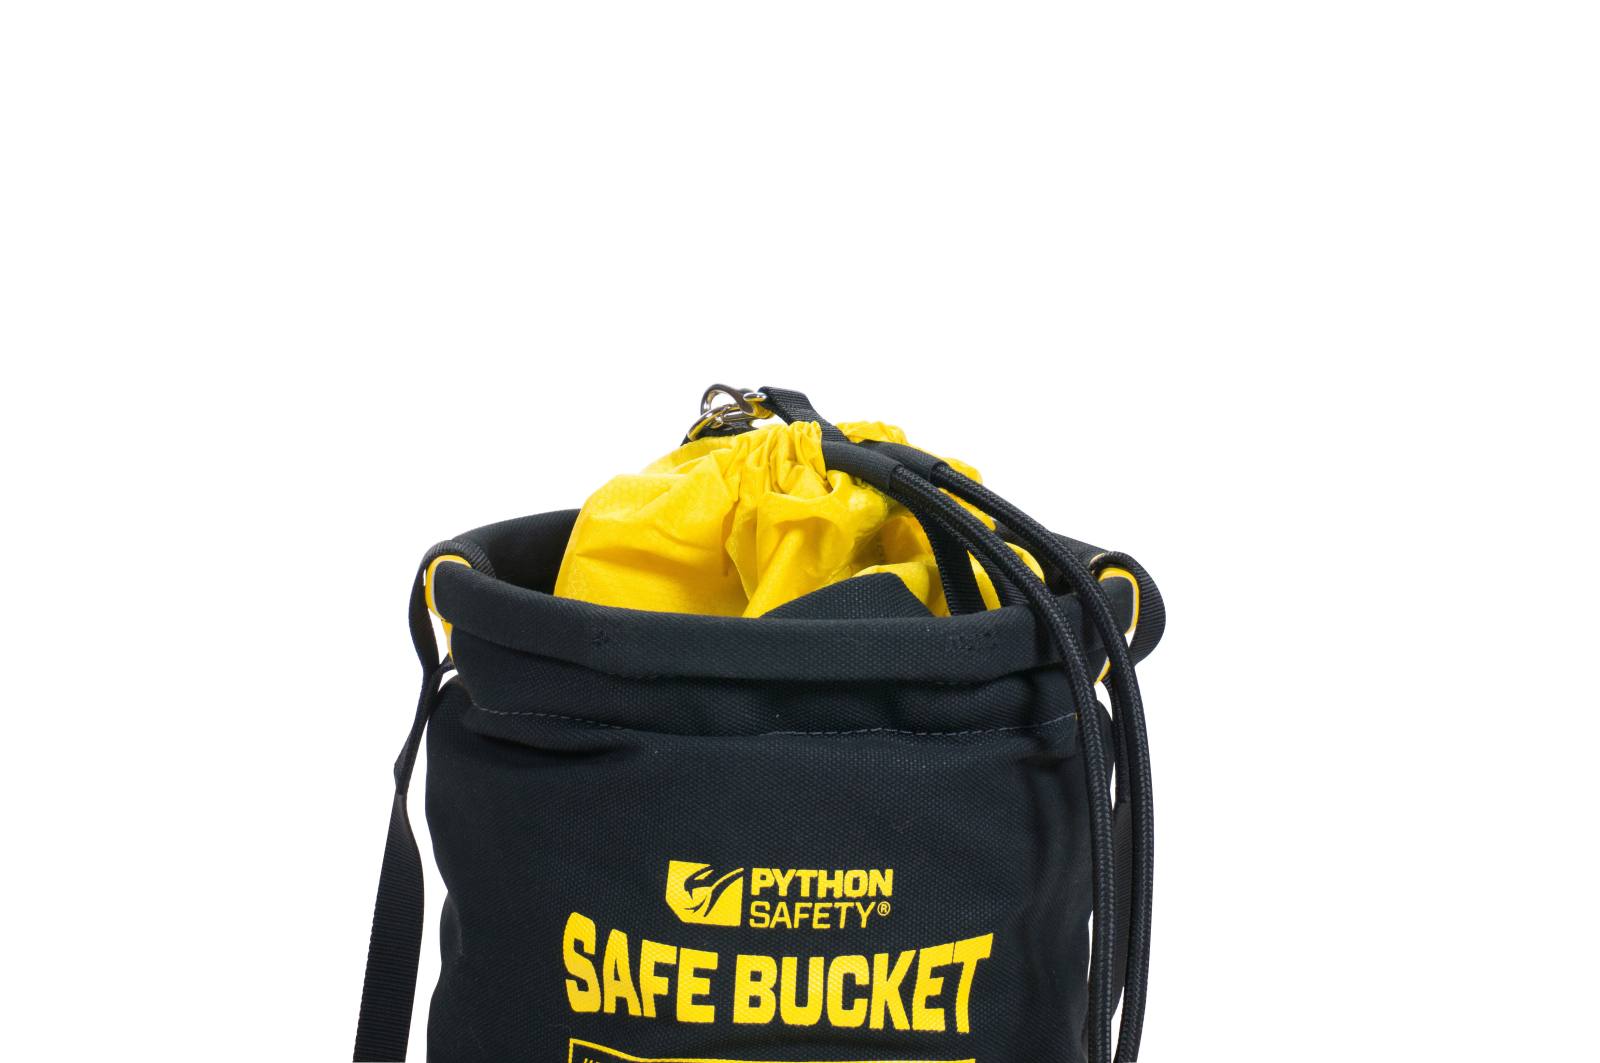 3M DBI-SALA dimensionally stable insert for SAFETY BUCKET transport bag, with storage pockets for tools, easy positioning thanks to Velcro fastening, removable